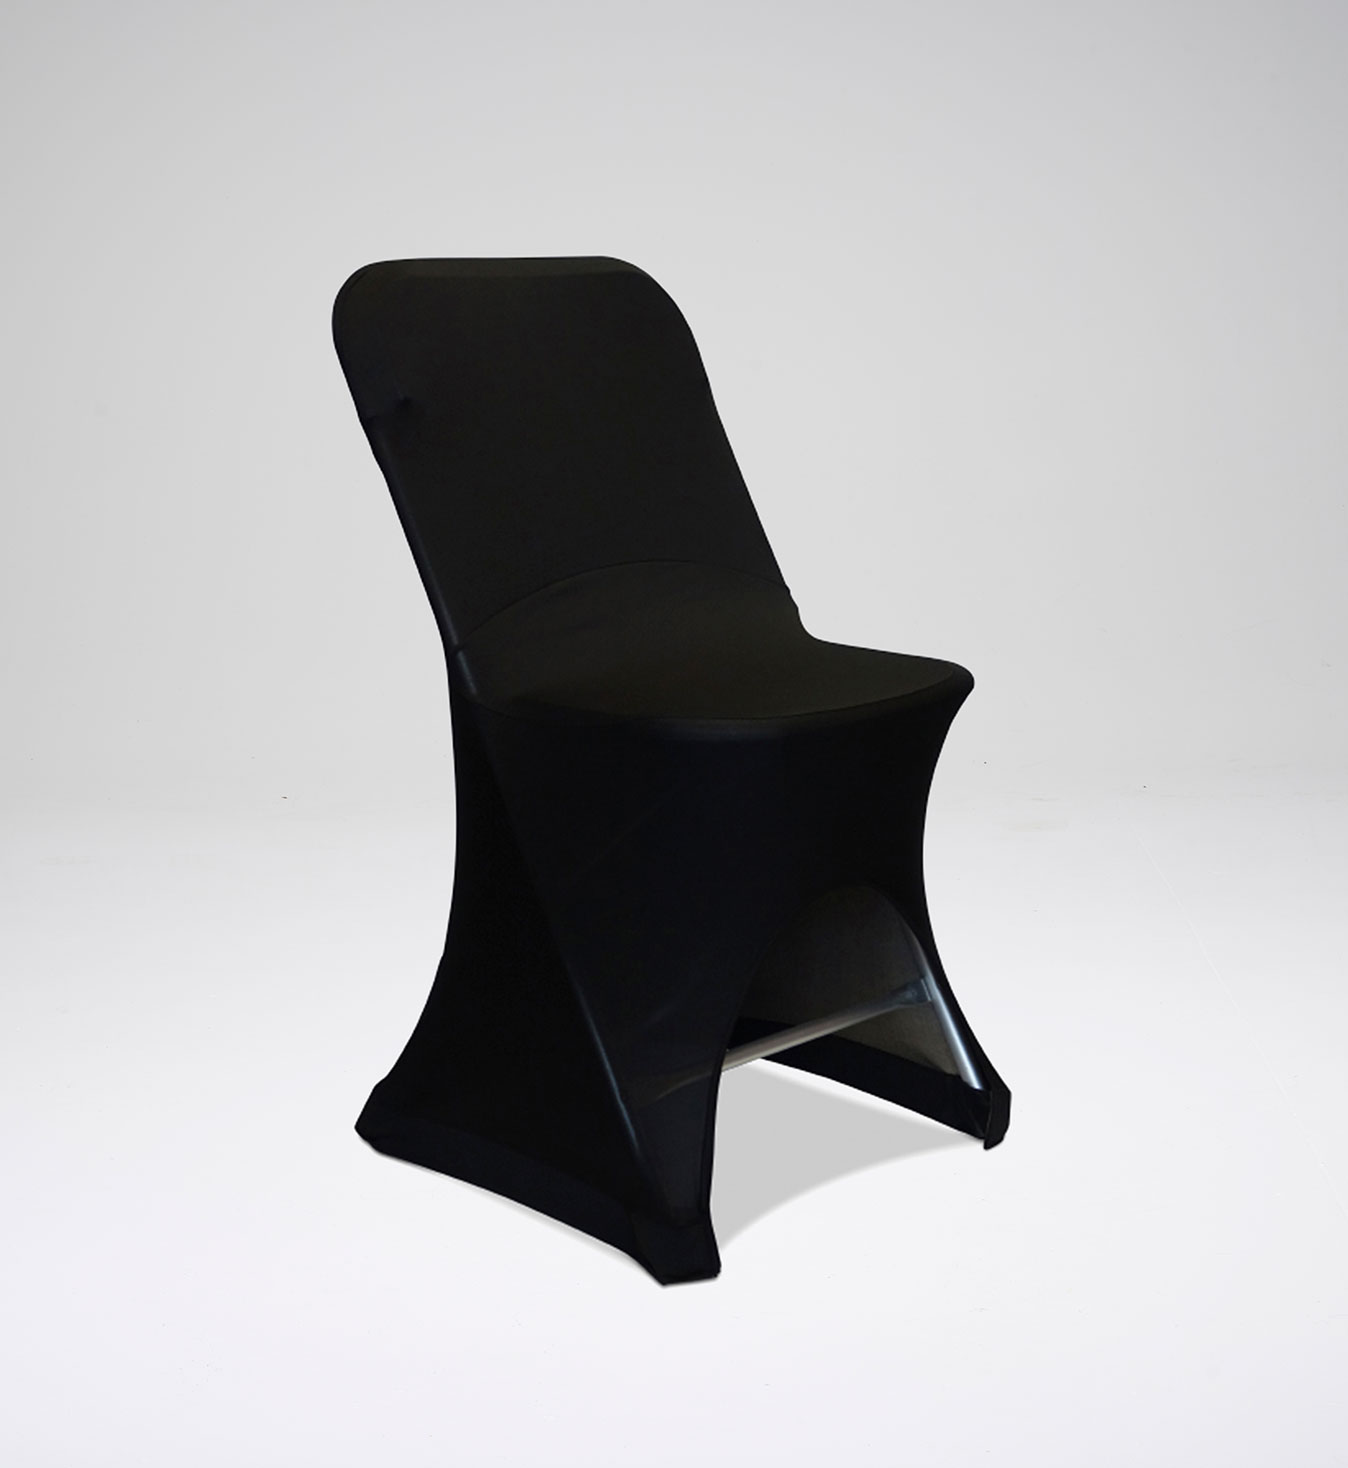 Lycra chair cover - Alloyfold, Commercial Seating & Furniture